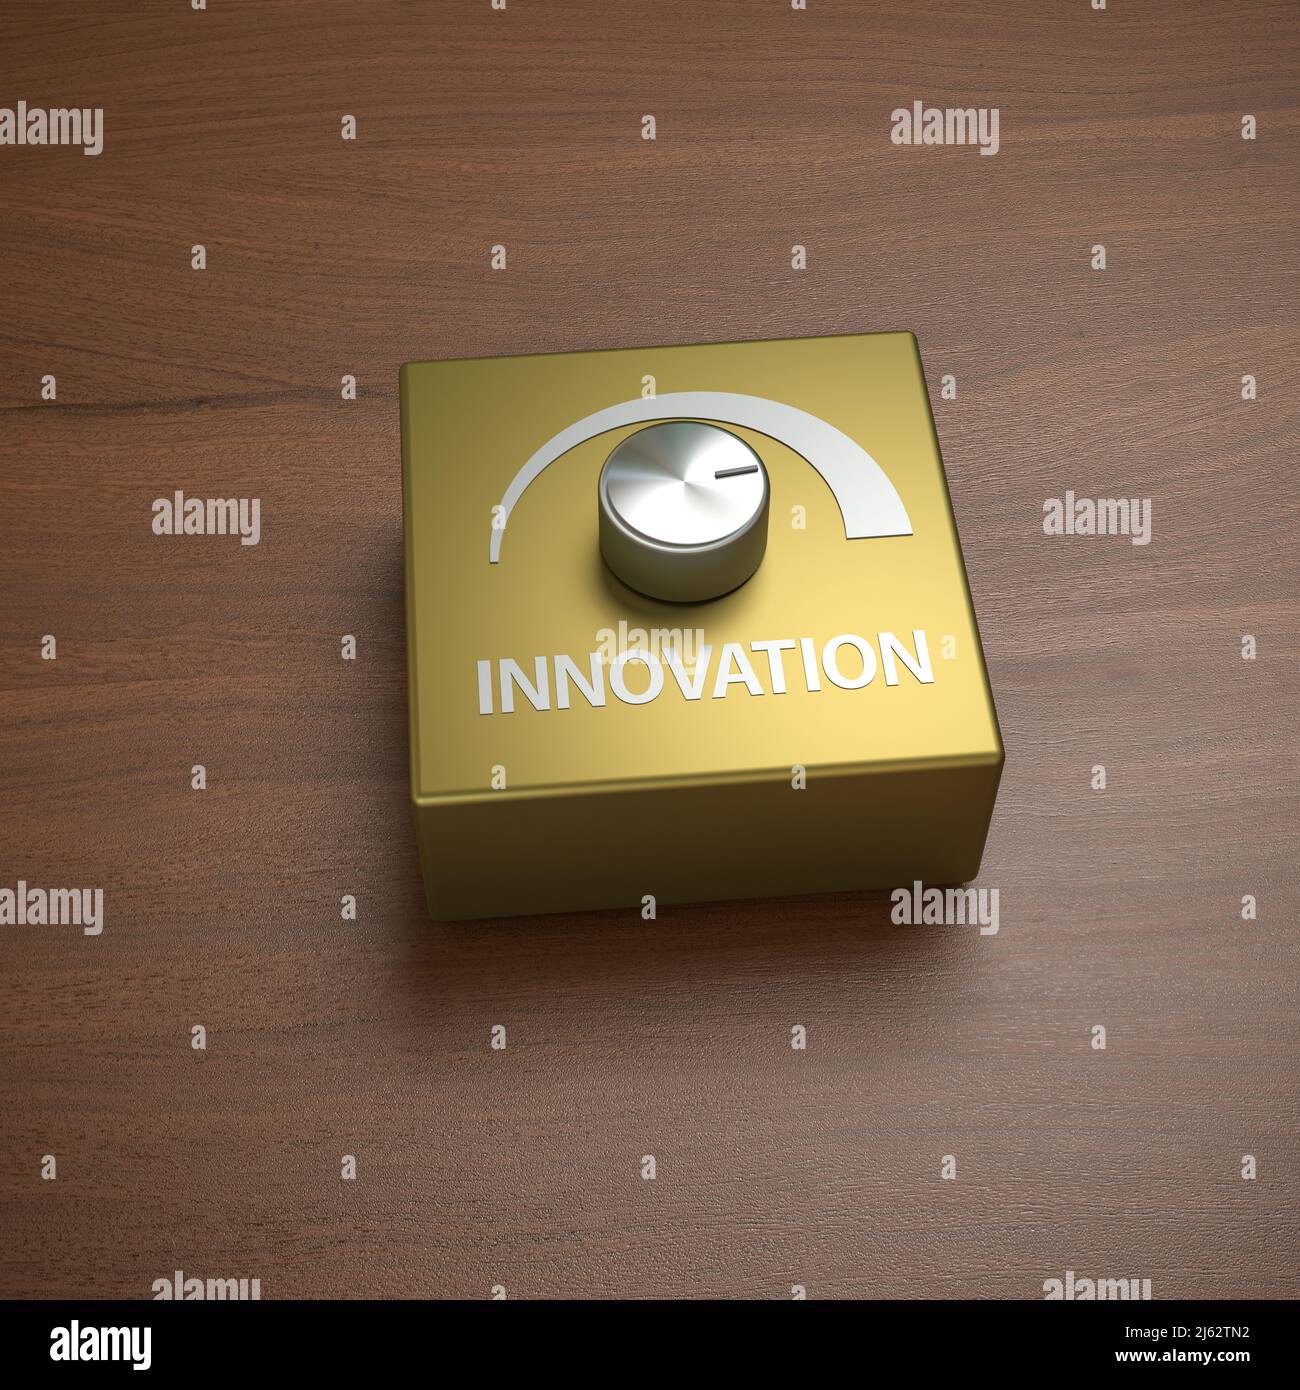 Golden magic box with a metallic Knob turned on full scale with the word 'Innovation' as a label - concept for measures to improve innovation. Box on Stock Photo